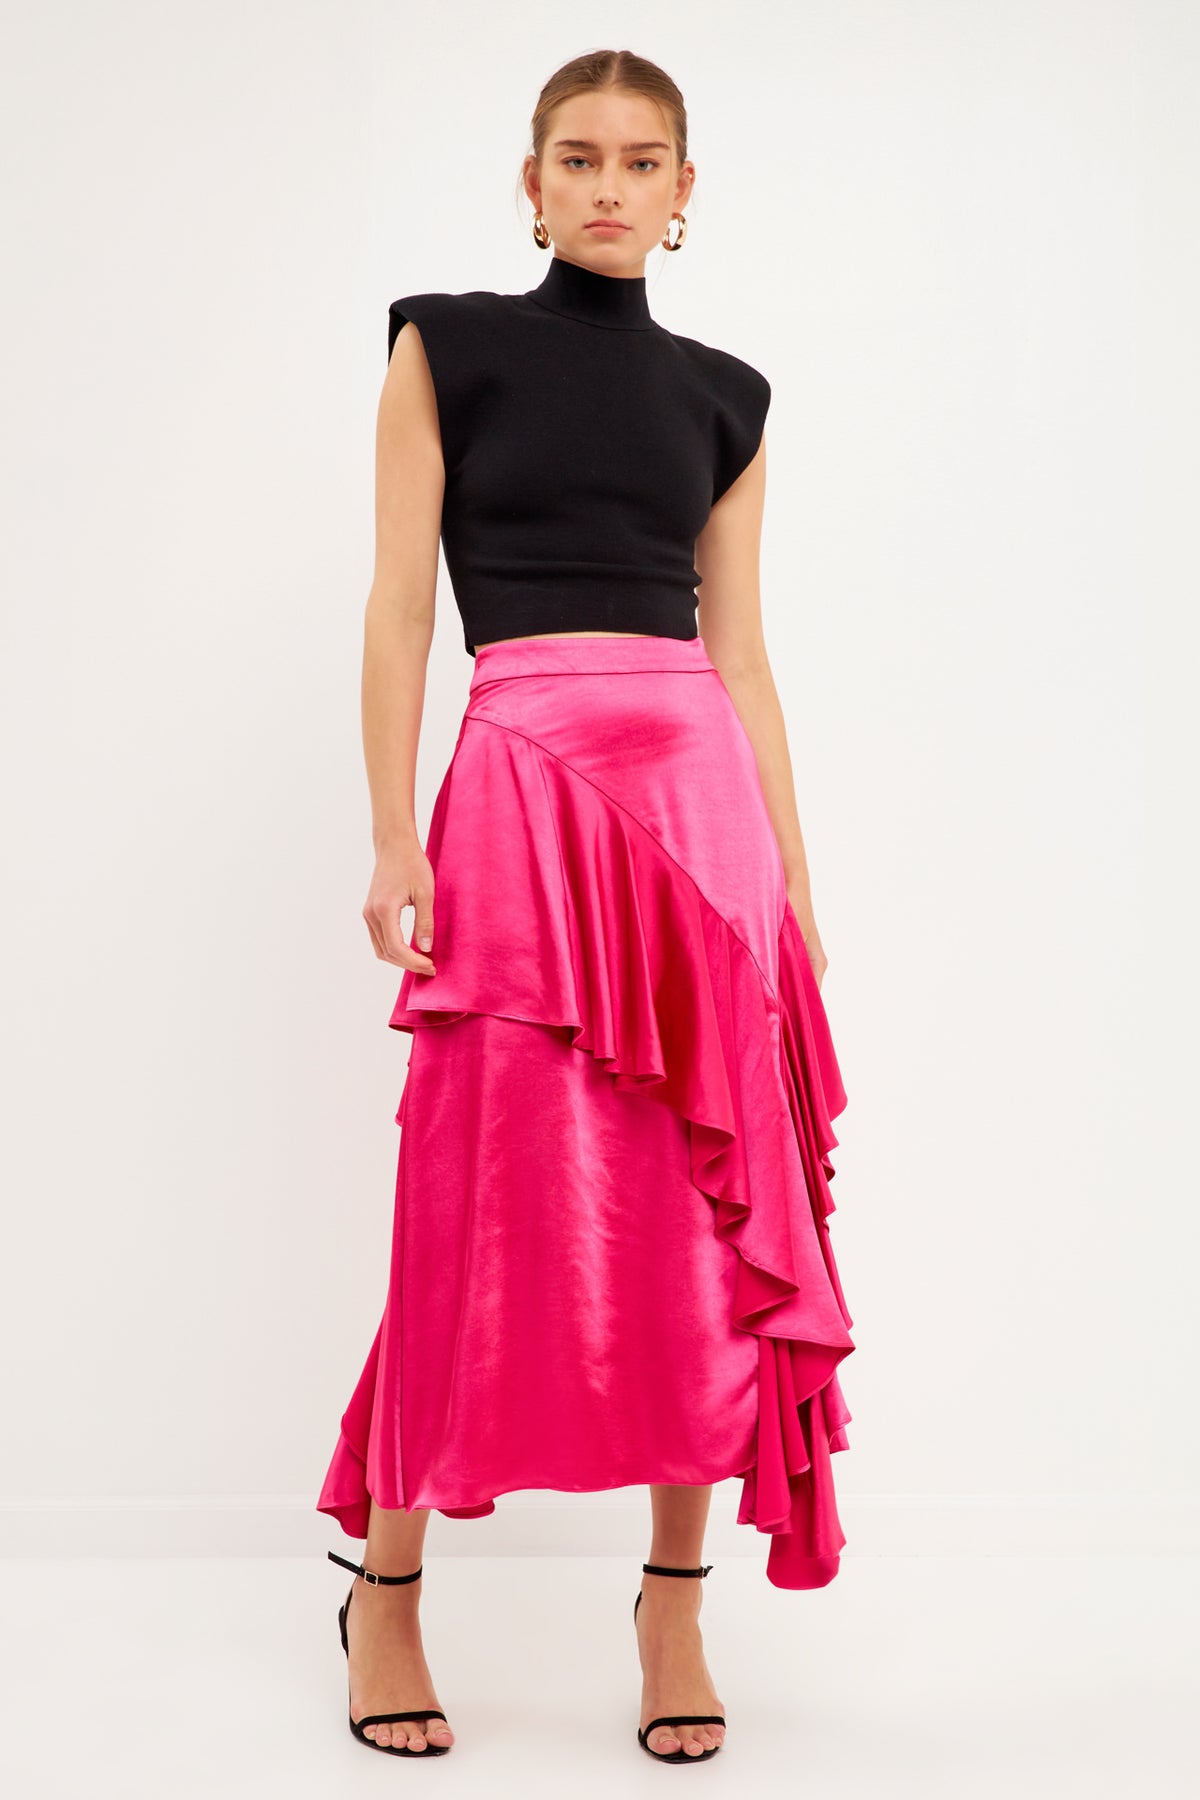 ENDLESS ROSE - Satin Waterfall Midi Skirt - SKIRTS available at Objectrare